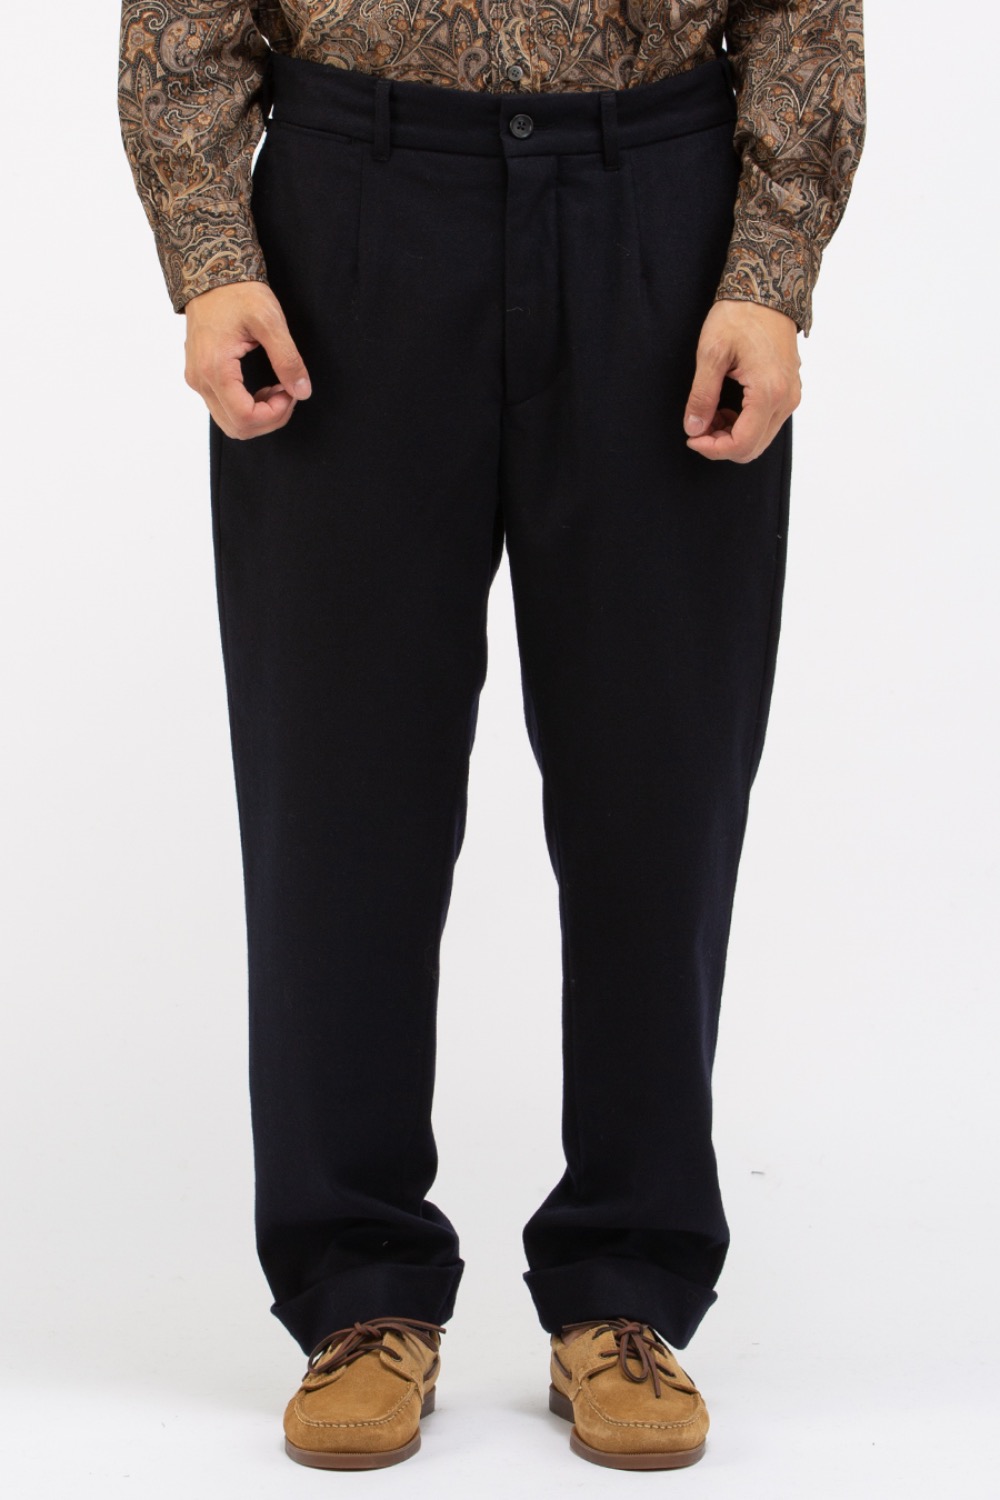 ANDOVER PANT DARK NAVY WOOL CASHMERE FLANNEL